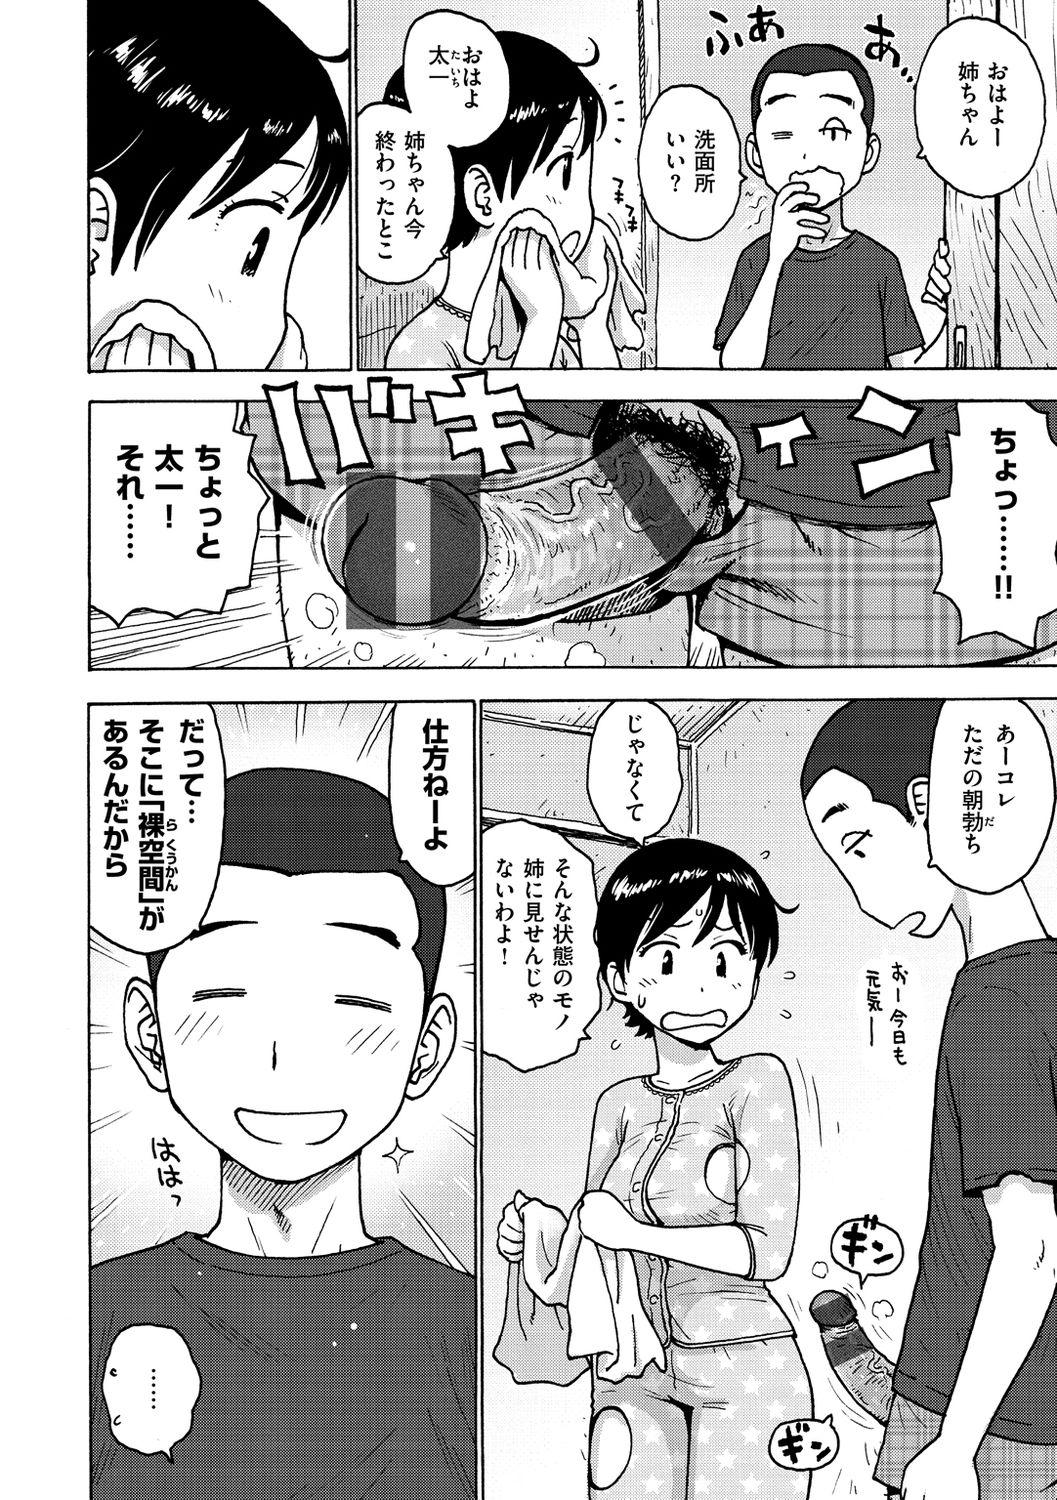 Muscle 裸空間の世界とか Livecams - Page 8